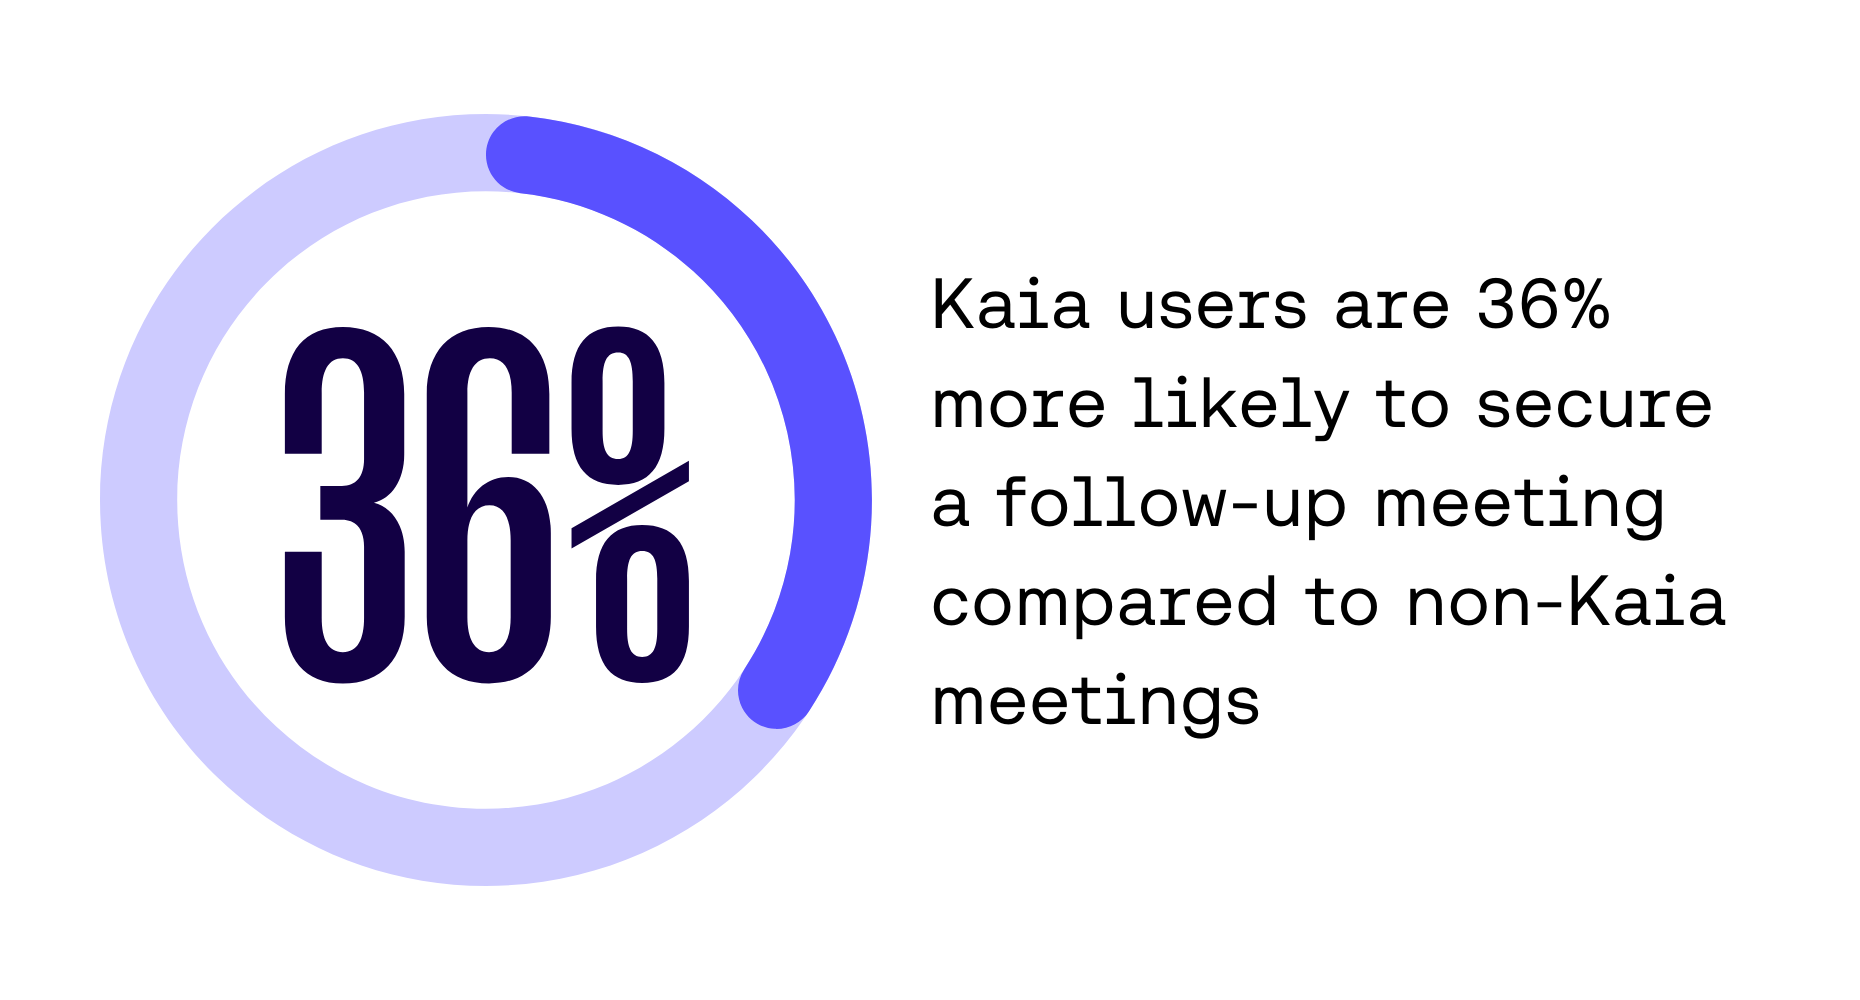 Statistic showing that Outreach Kaia users are 36% more likely to secure a follow-up meeting compared to non-Kaia meetings